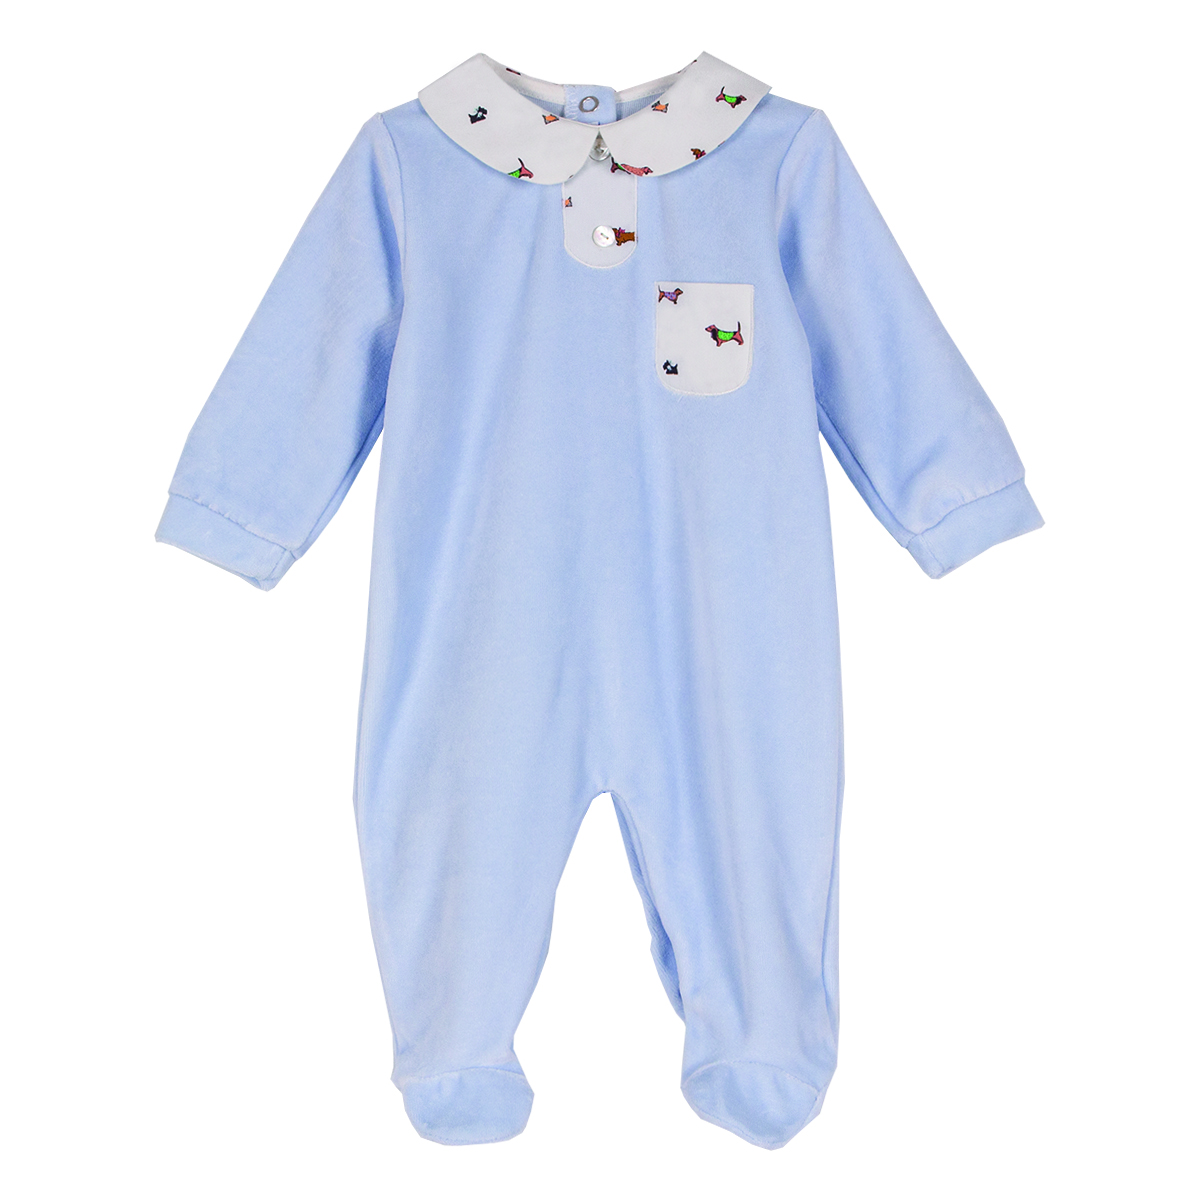 Siola Babies' Onesie With Doggies Print In Cielo